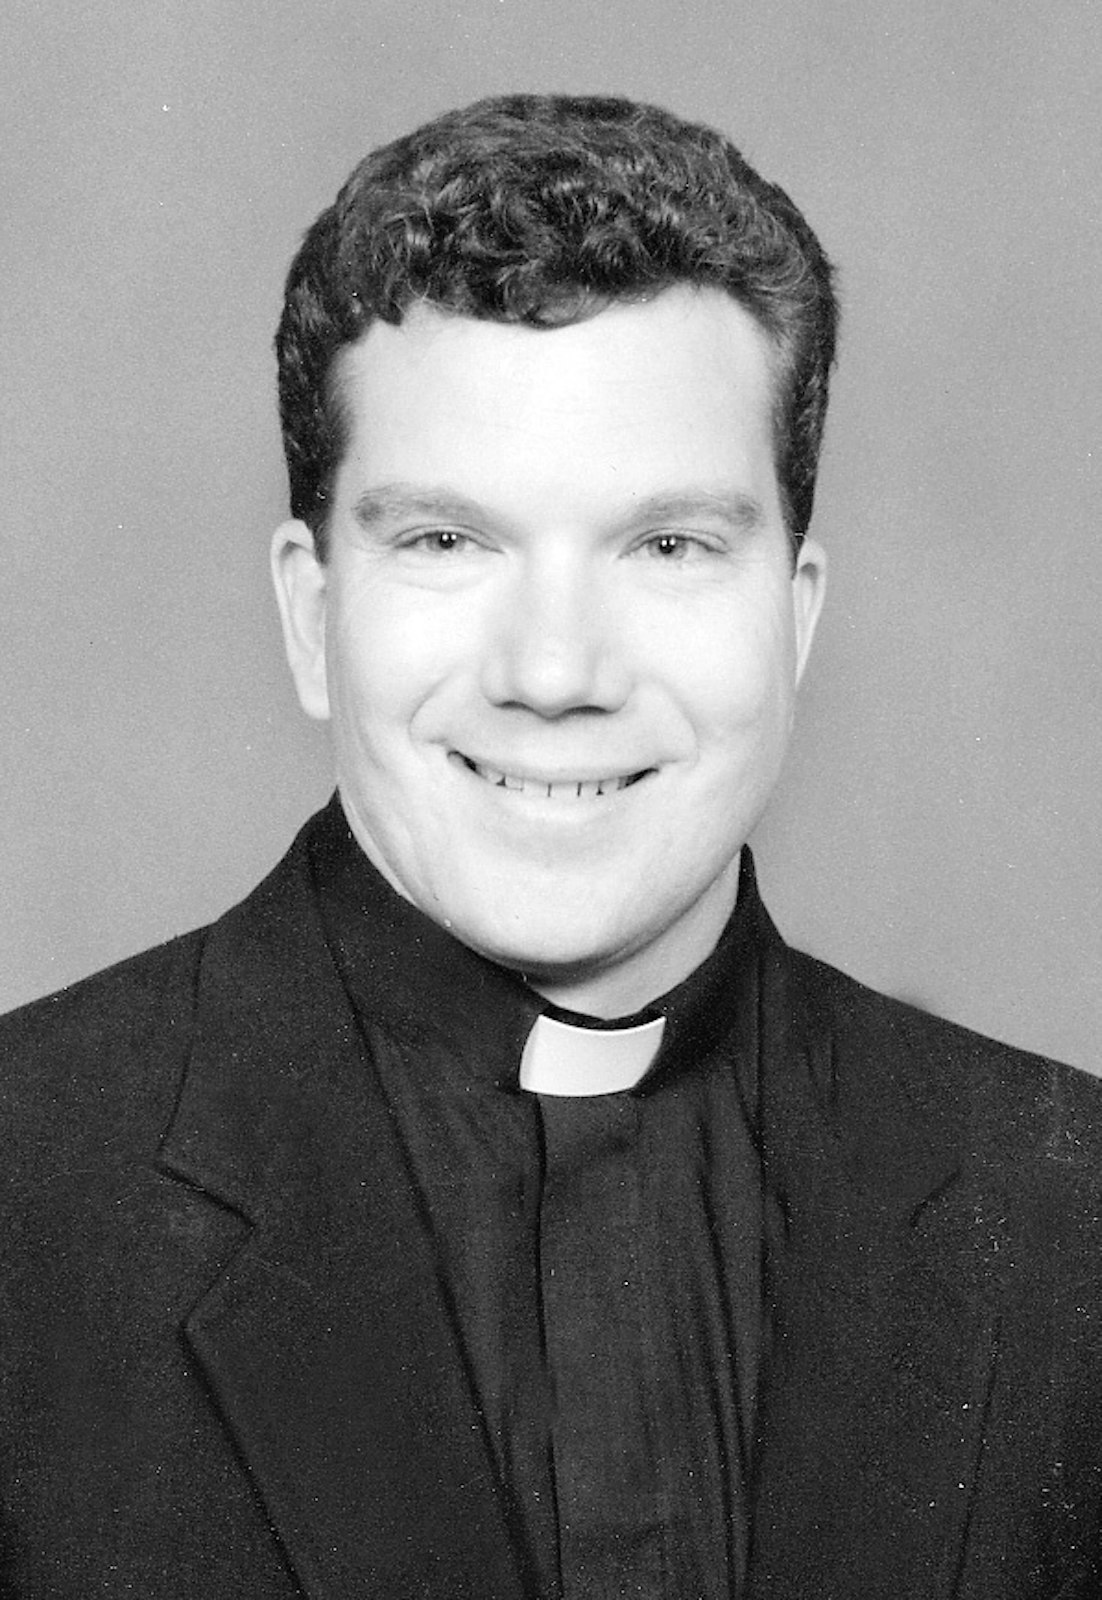 Then-Fr. Jeffrey M. Monforton is pictured in this 2005 photo. Growing up in Westland, Bishop Monforton credits his family's influence for shaping his faith at an early age. (Archdiocese of Detroit file photo)